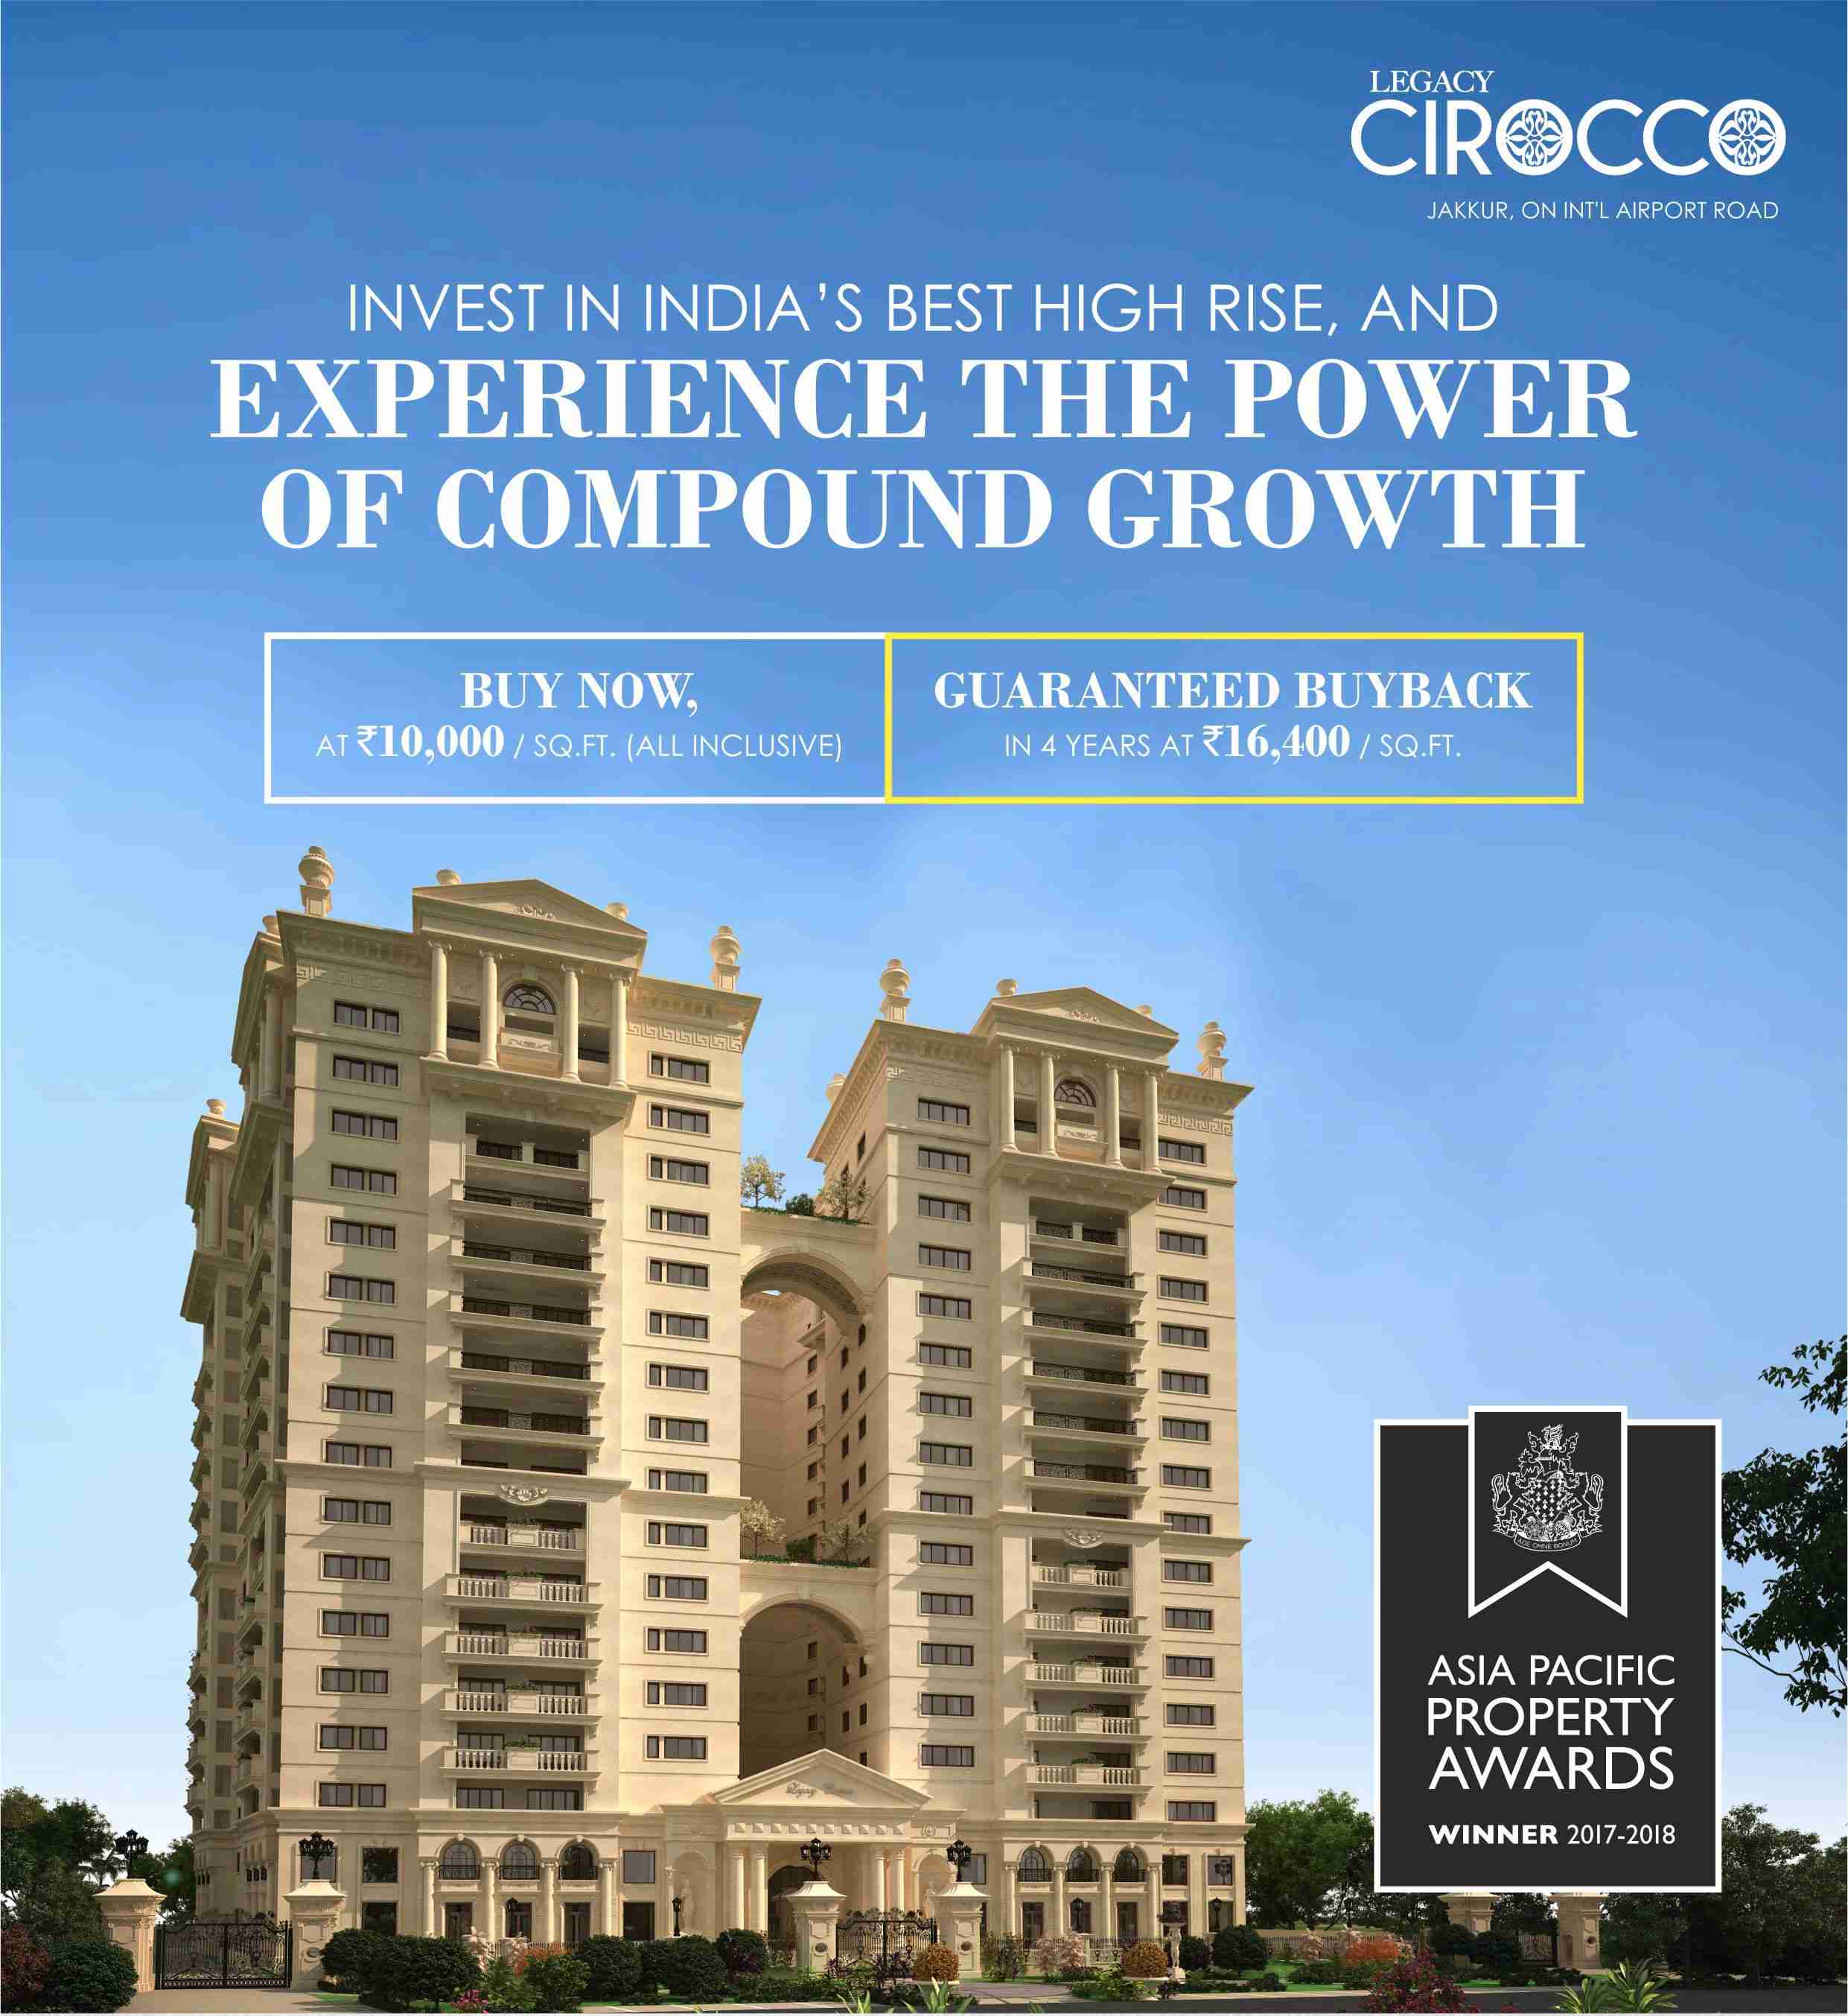 Legacy Cirocco Offers Guaranteed Buyback On India's Best High Rise